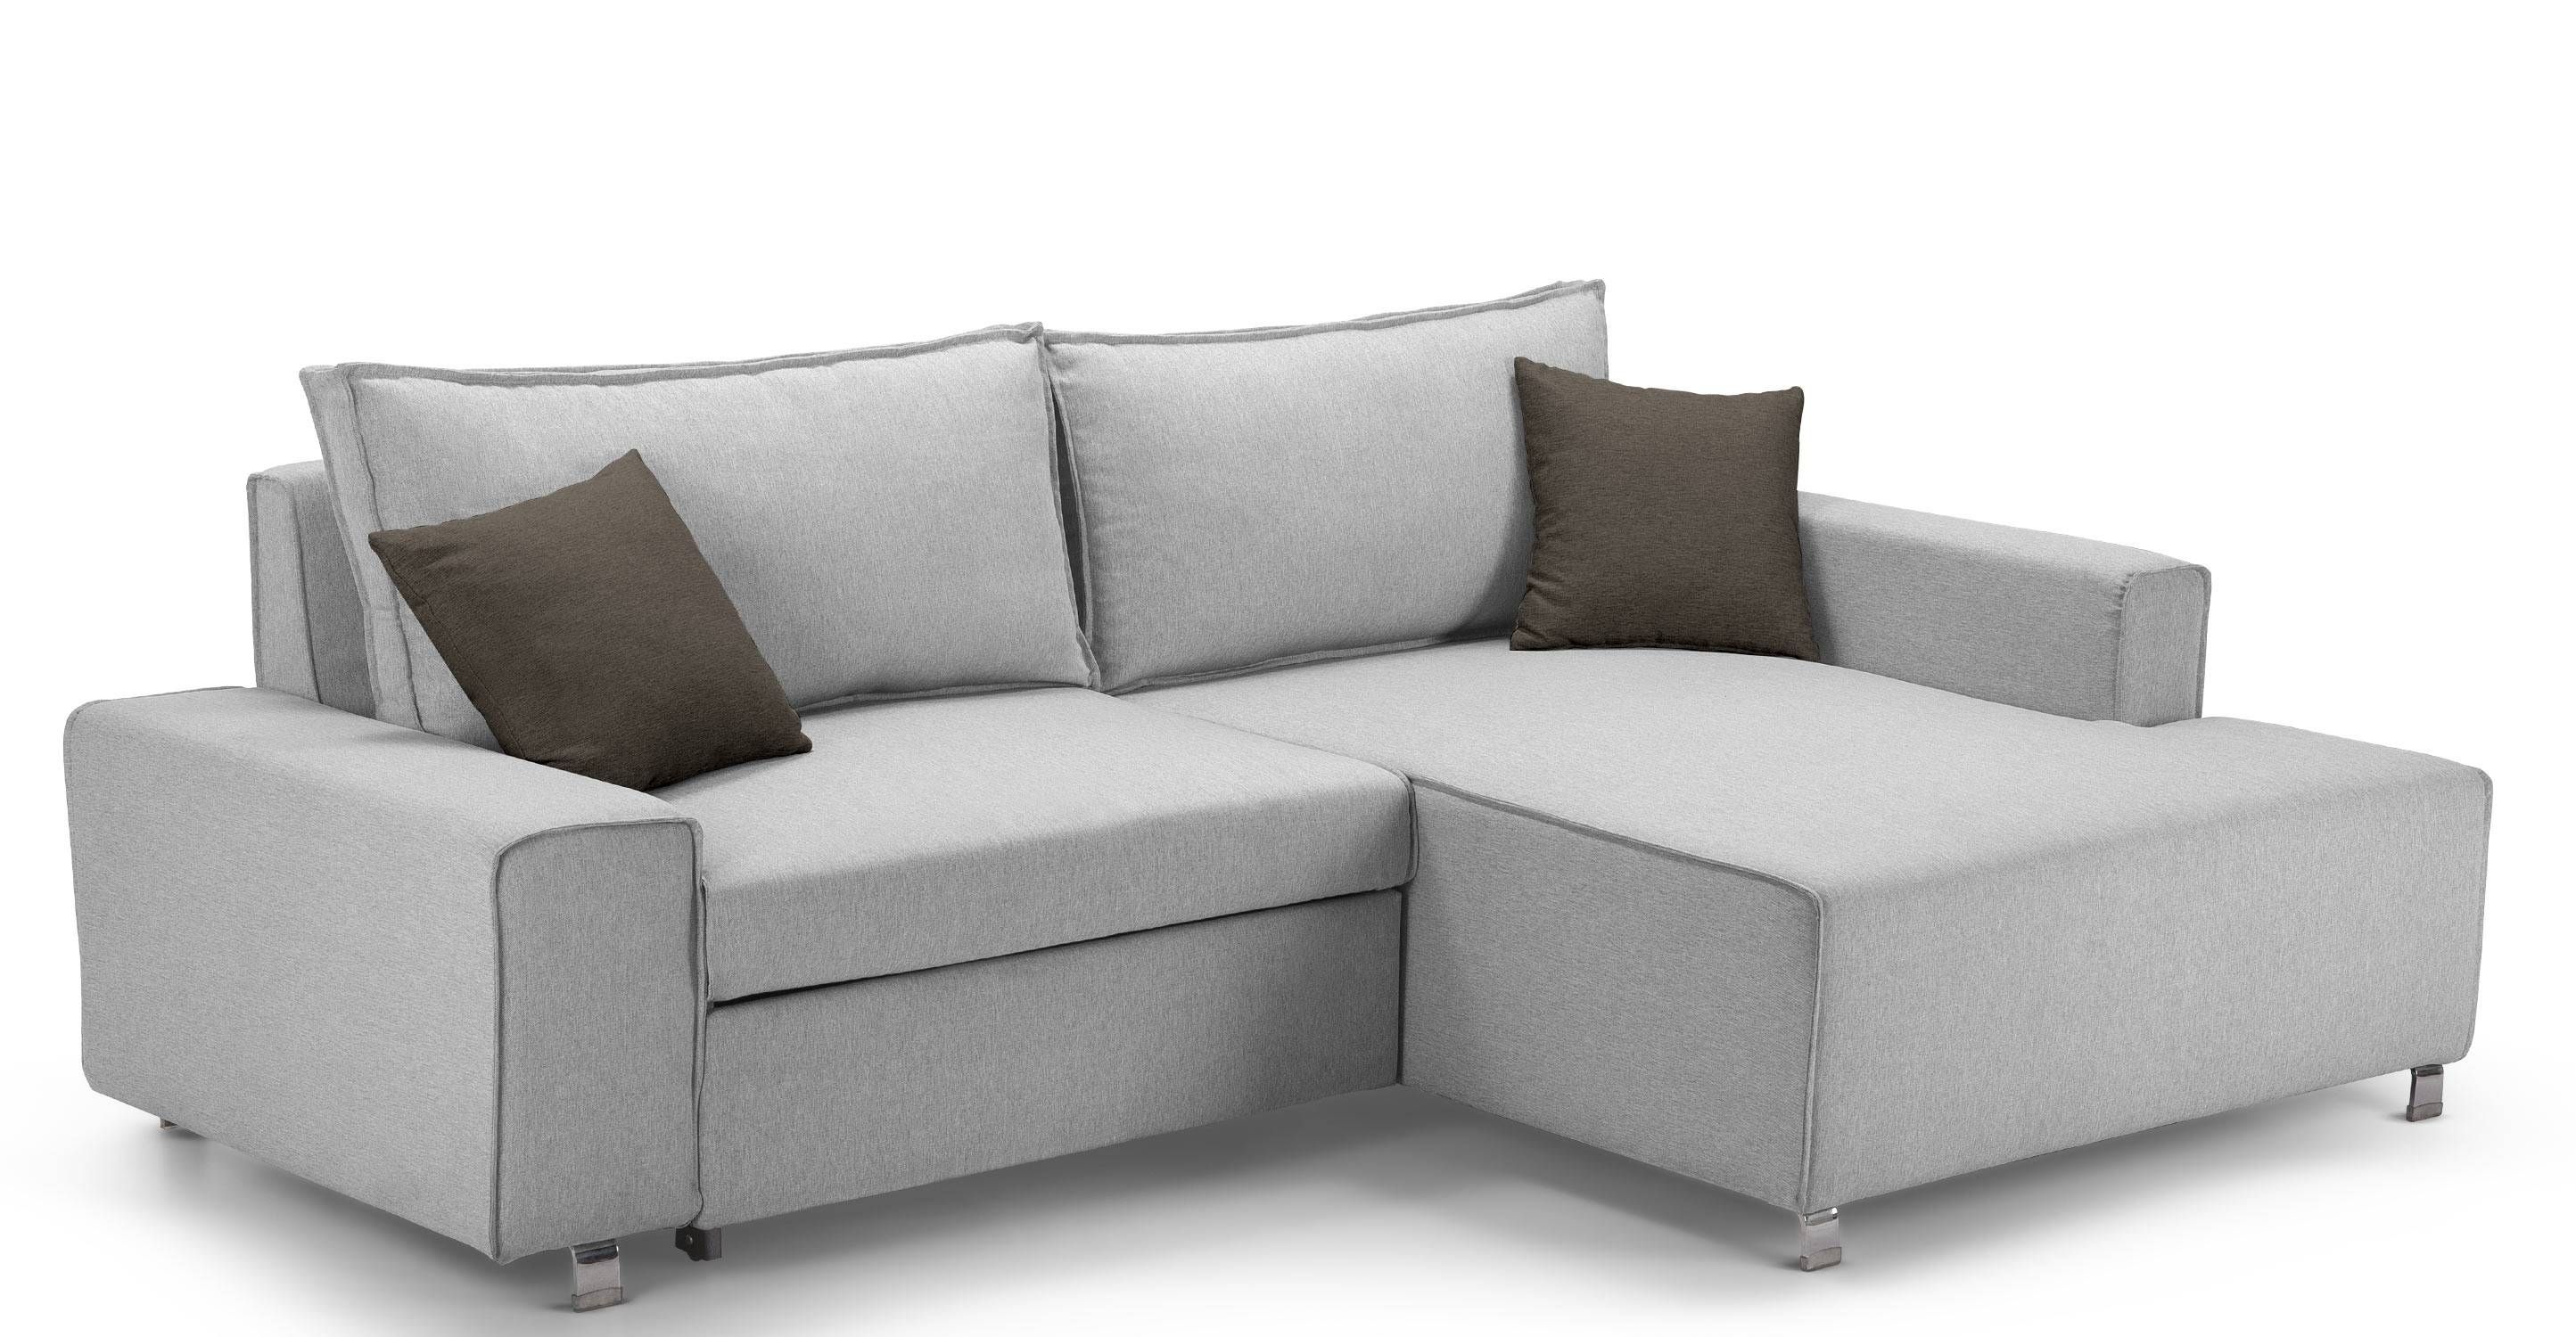 Ideas: Interesting Britania Corner Couch With Elegant Pattern For Regarding 2 Seat Sectional Sofas (View 15 of 30)